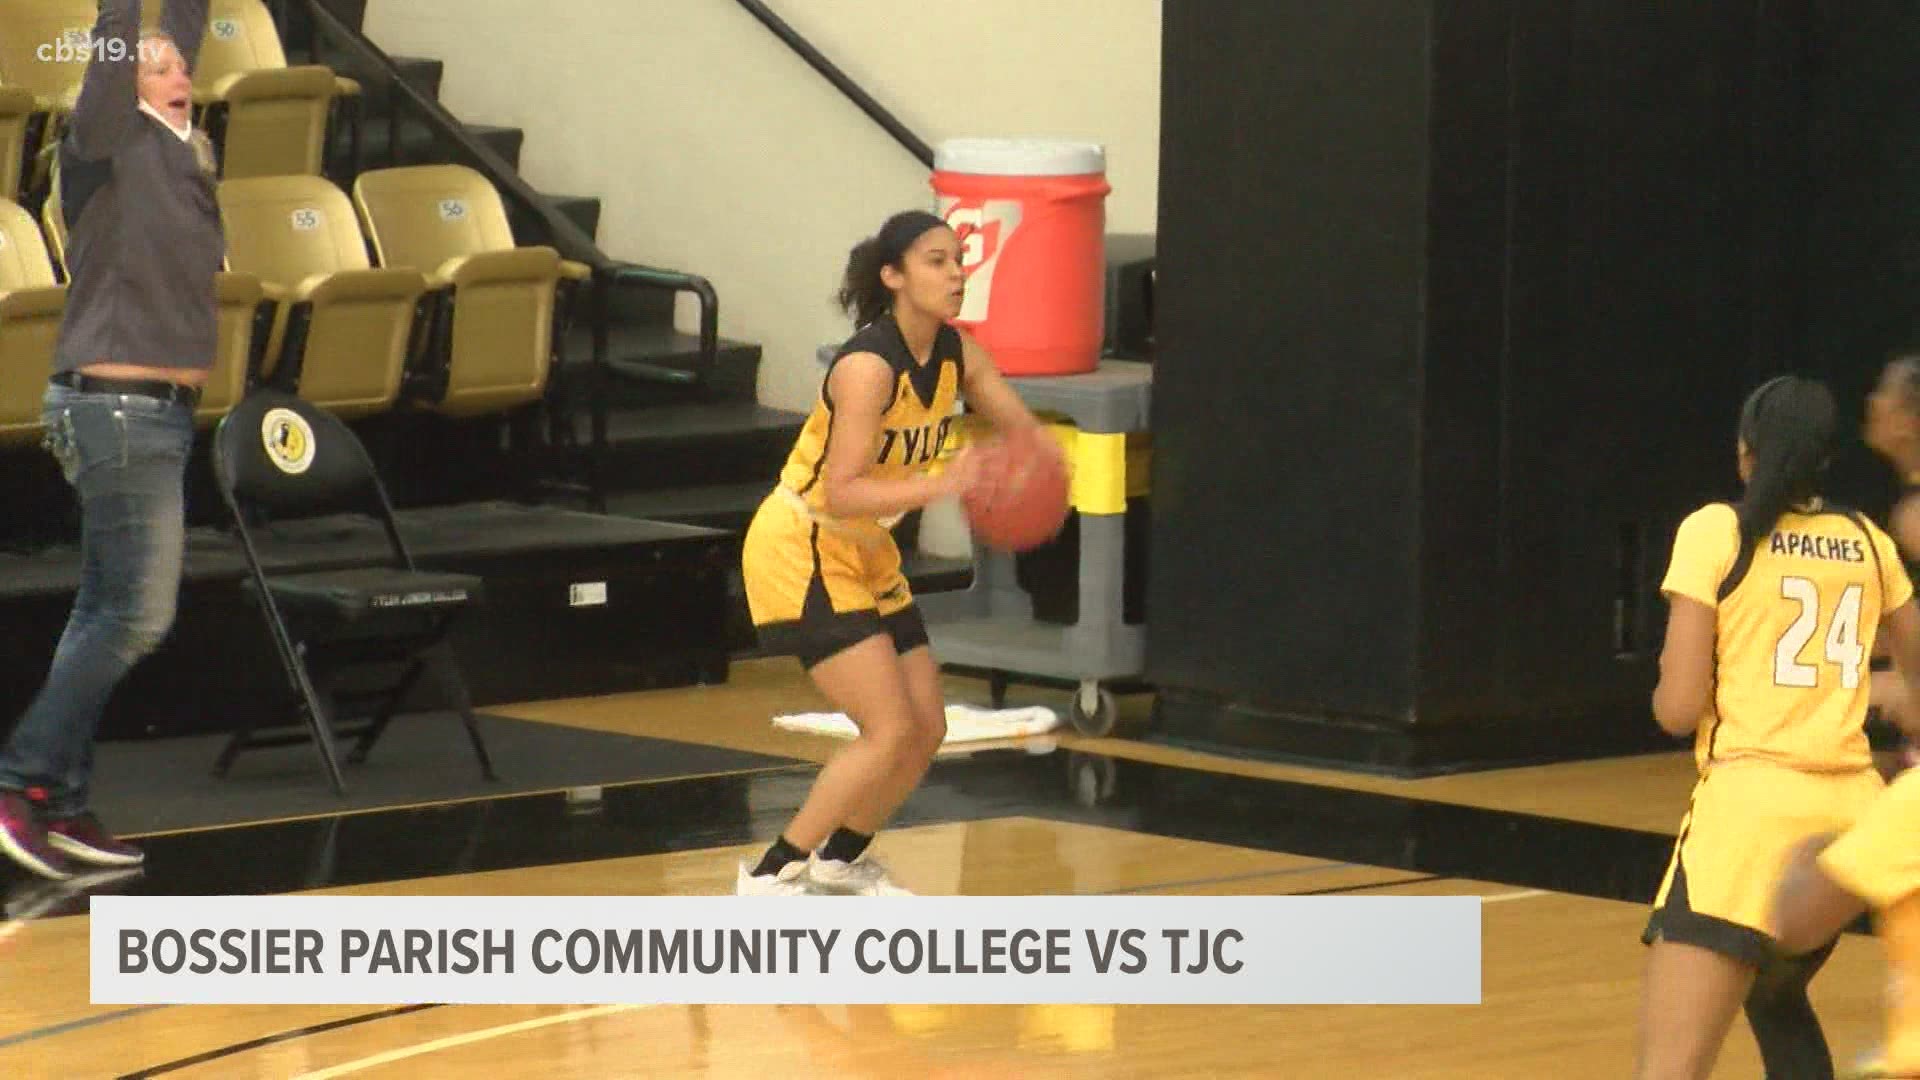 TJC takes care of business Wednesday night in victory over Bossier Parish C.C.